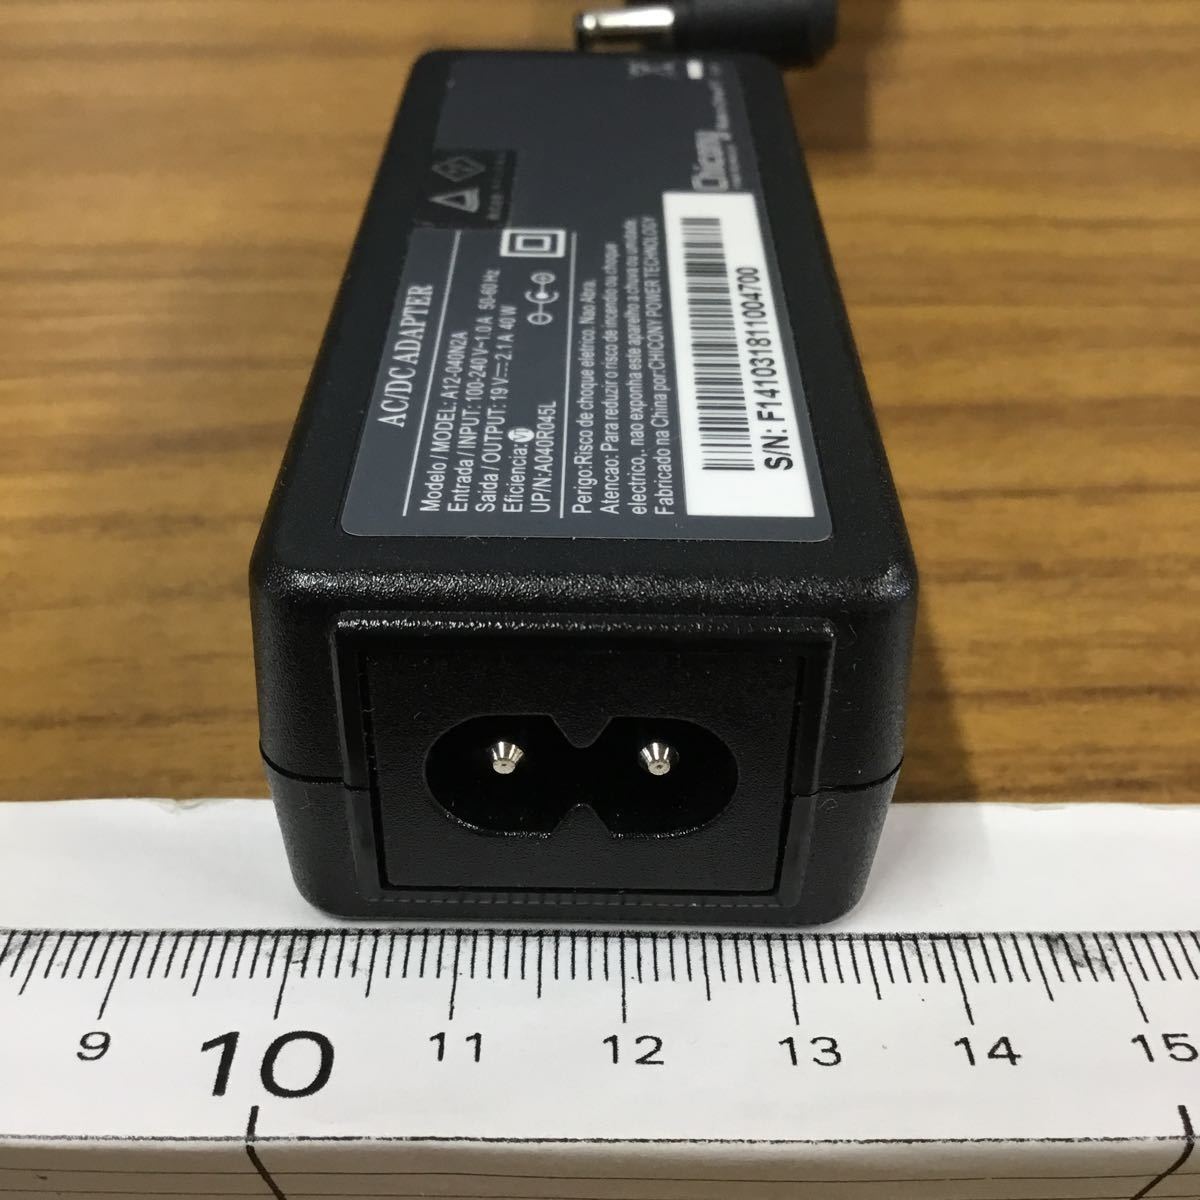 （1215OH06）送料無料/中古/Chicony チコニー/A12-040N2A/19V/2.1A/純正 ACアダプタ 6個セット_画像3